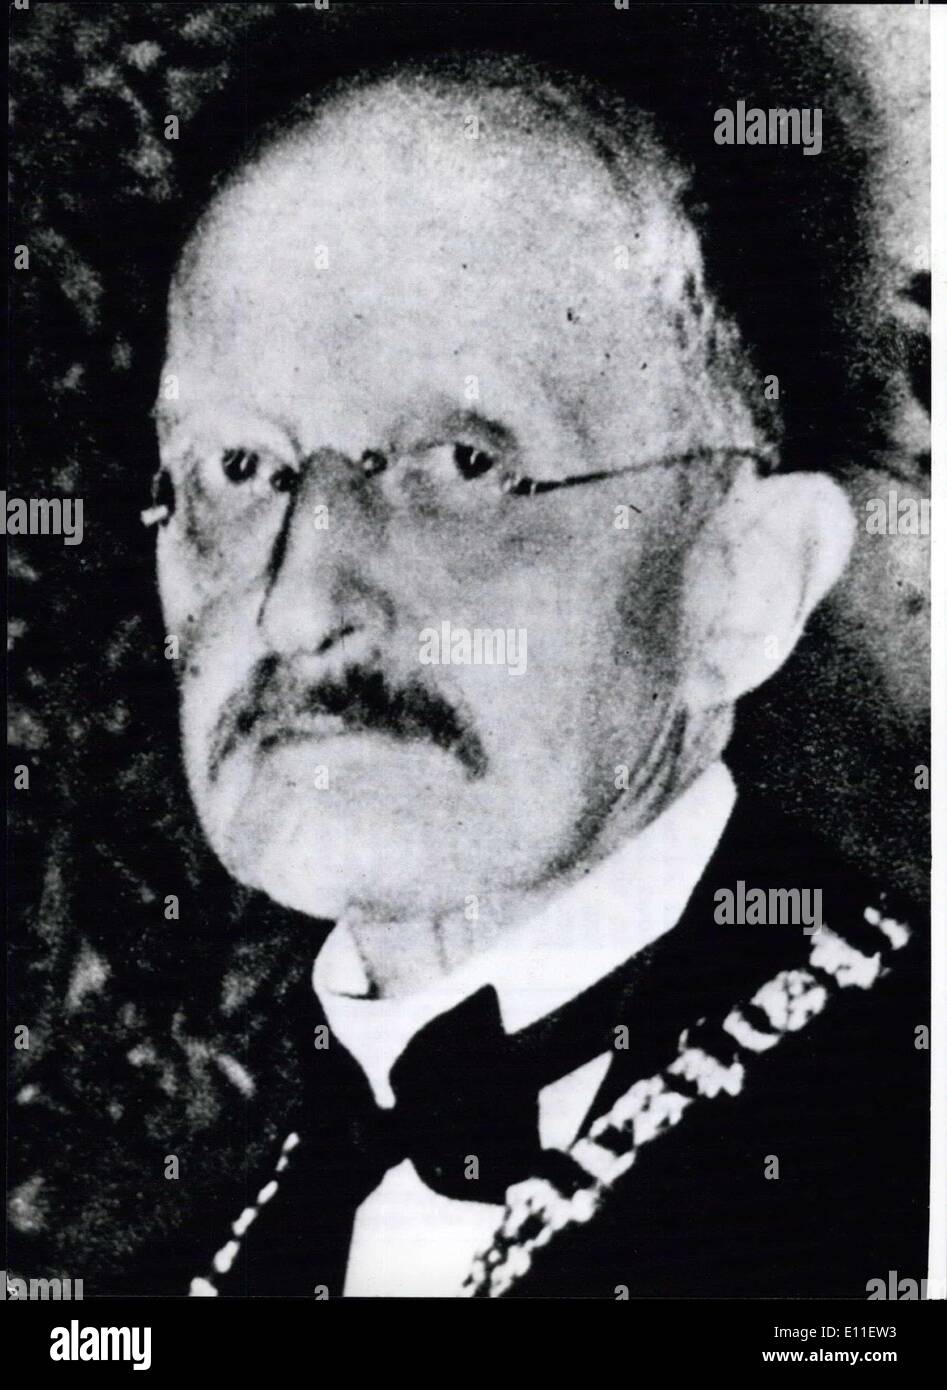 Oct. 04, 1977 - 30th Day Of Death Of Max Planck 30 years ago: on October 4th, 1947, died in Goettingen (FRG) Max Planck (Max Planck - our picture), who went down in history because of his pioneering works in the field of physics. Max Planck, born in Kiel (FRG) in 1858, acted as professor in his home-town Kiel and in Berlin and from 1930 to 1937 he was president of the Kaiser-Wilhelm-Society for promotion of science (today Max-Planck-Society). The first works of Planck dealed with the use of thermo-dynamics on proceedings in gases, liquids and solutions Stock Photo